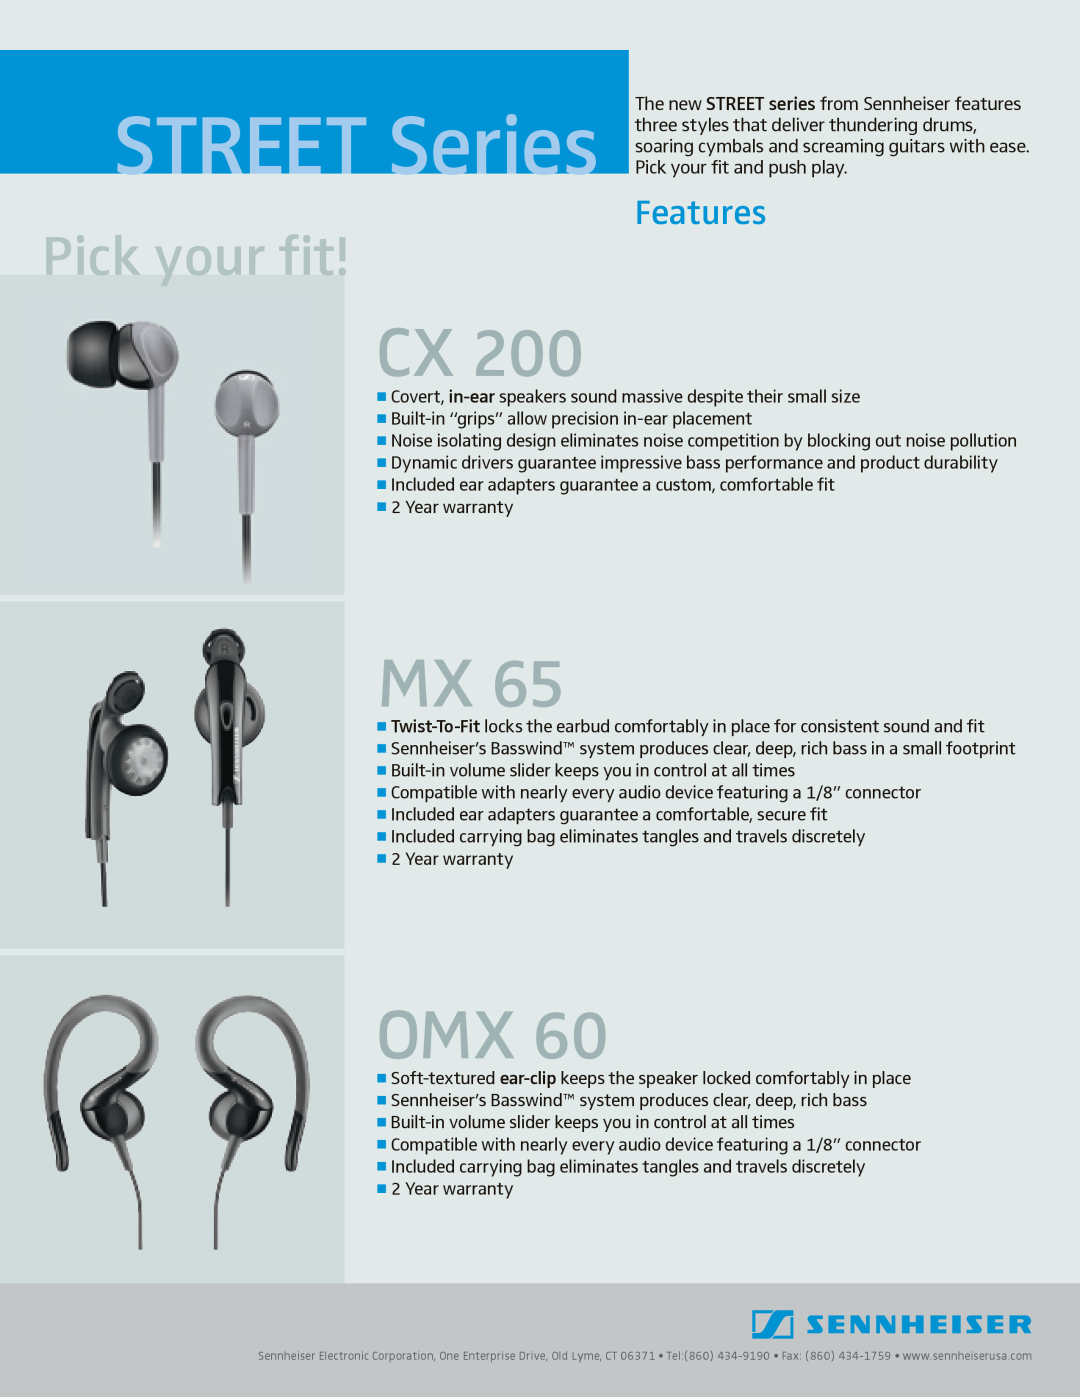 Sennheiser CX200, OMX 60 VC warranty STREET Series, Pick your fit, Features 